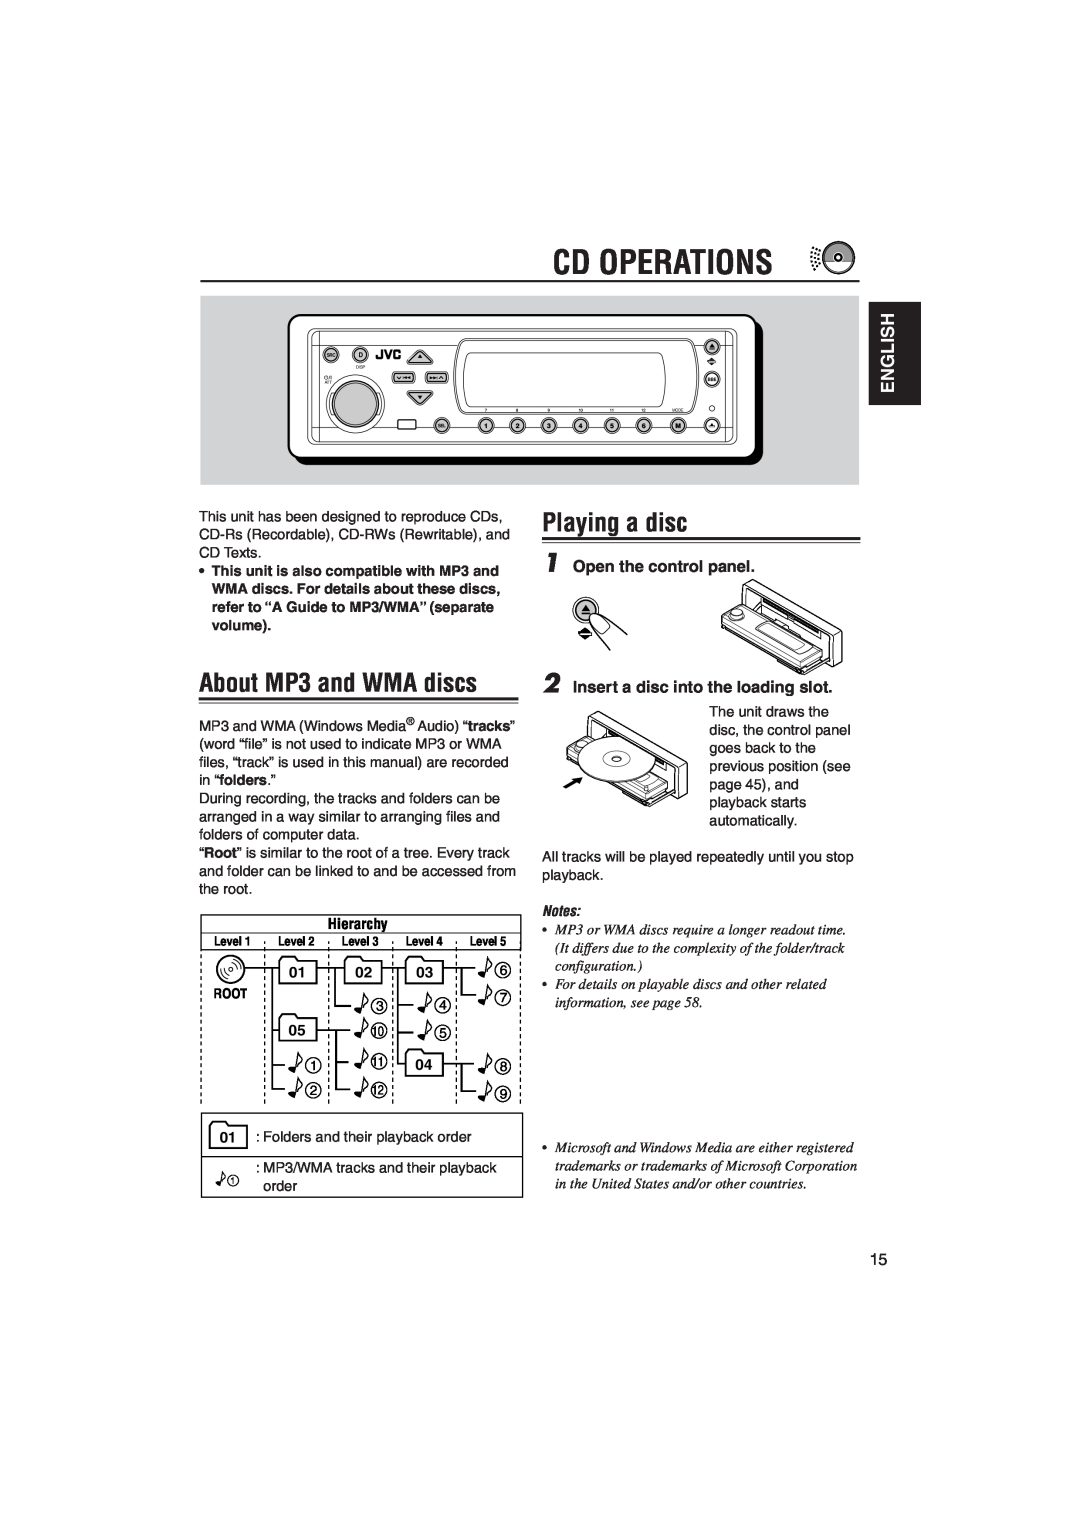 JVC KD-SH9105 manual Cd Operations, Playing a disc, About MP3 and WMA discs, English, Open the control panel, Hierarchy 